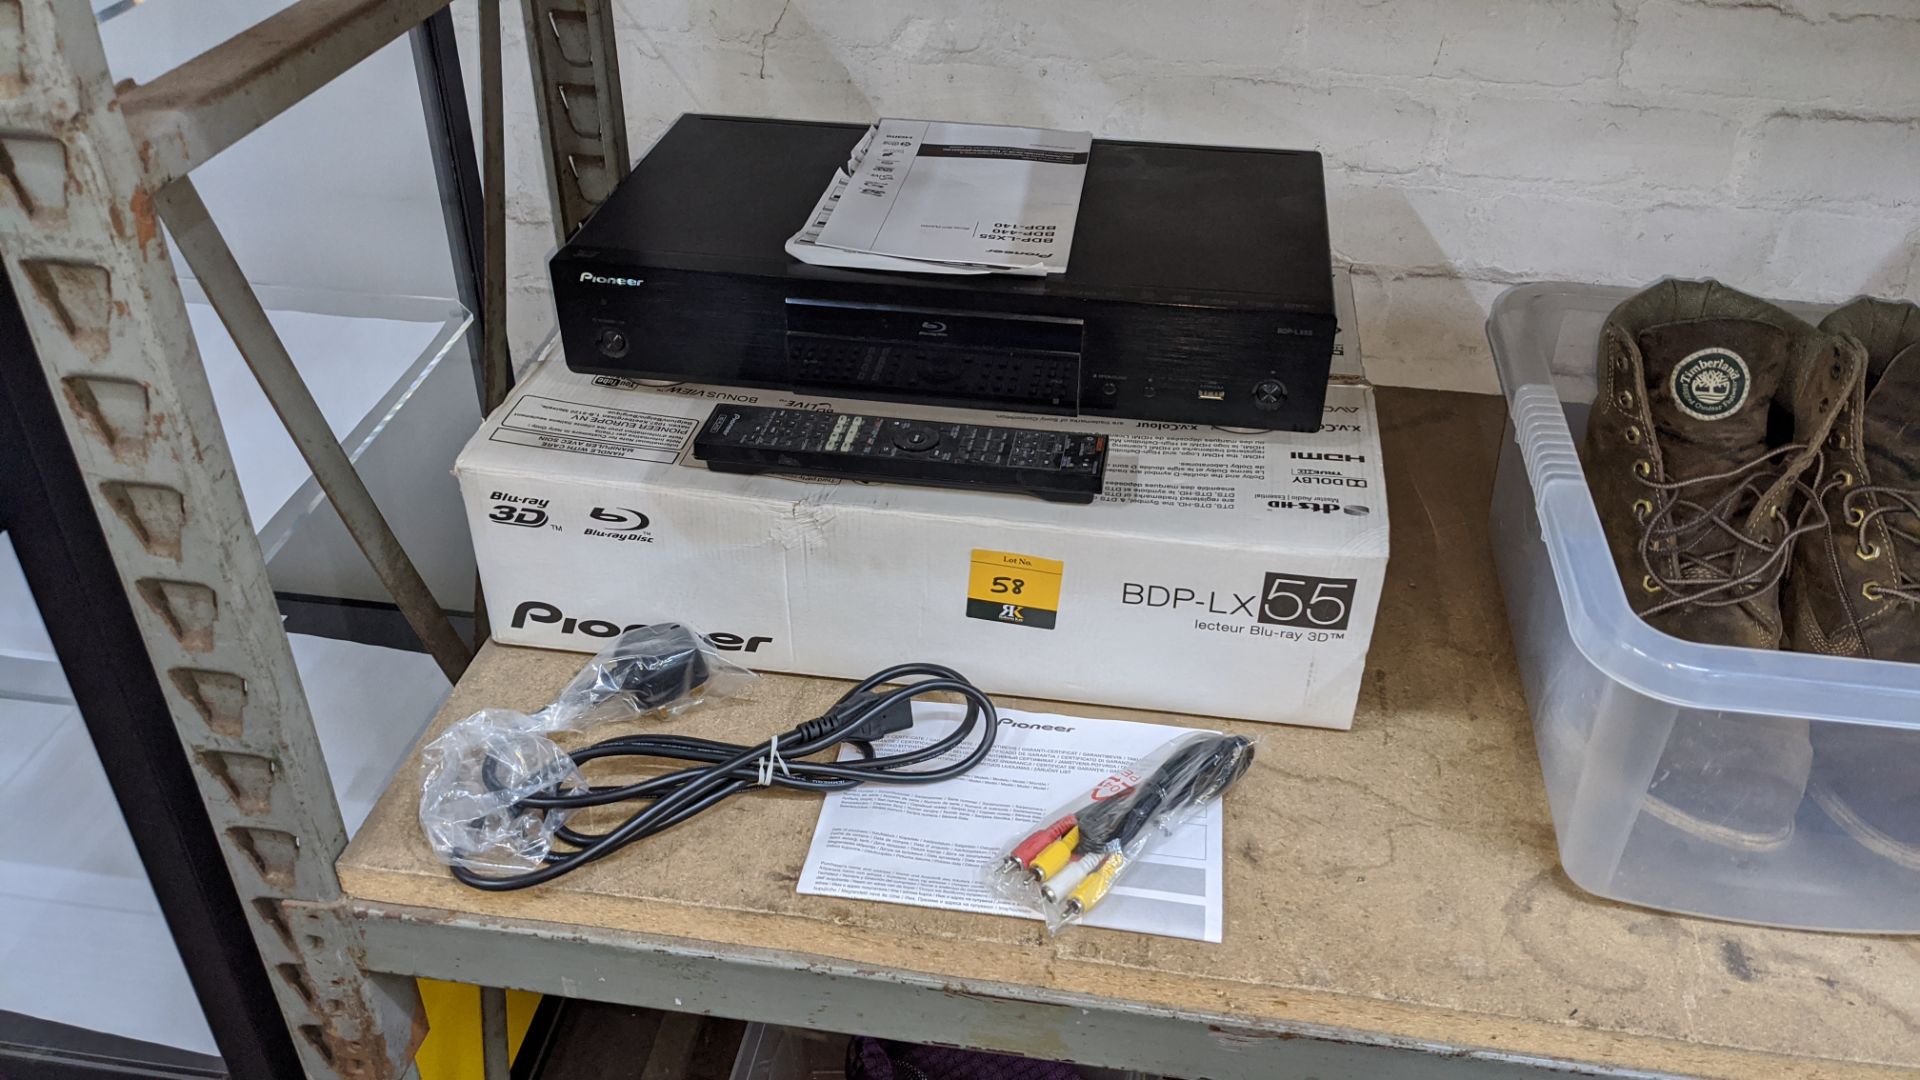 Pioneer 3D Blu-ray disc player model BDP-LX55, including original box, manual, cables and remote